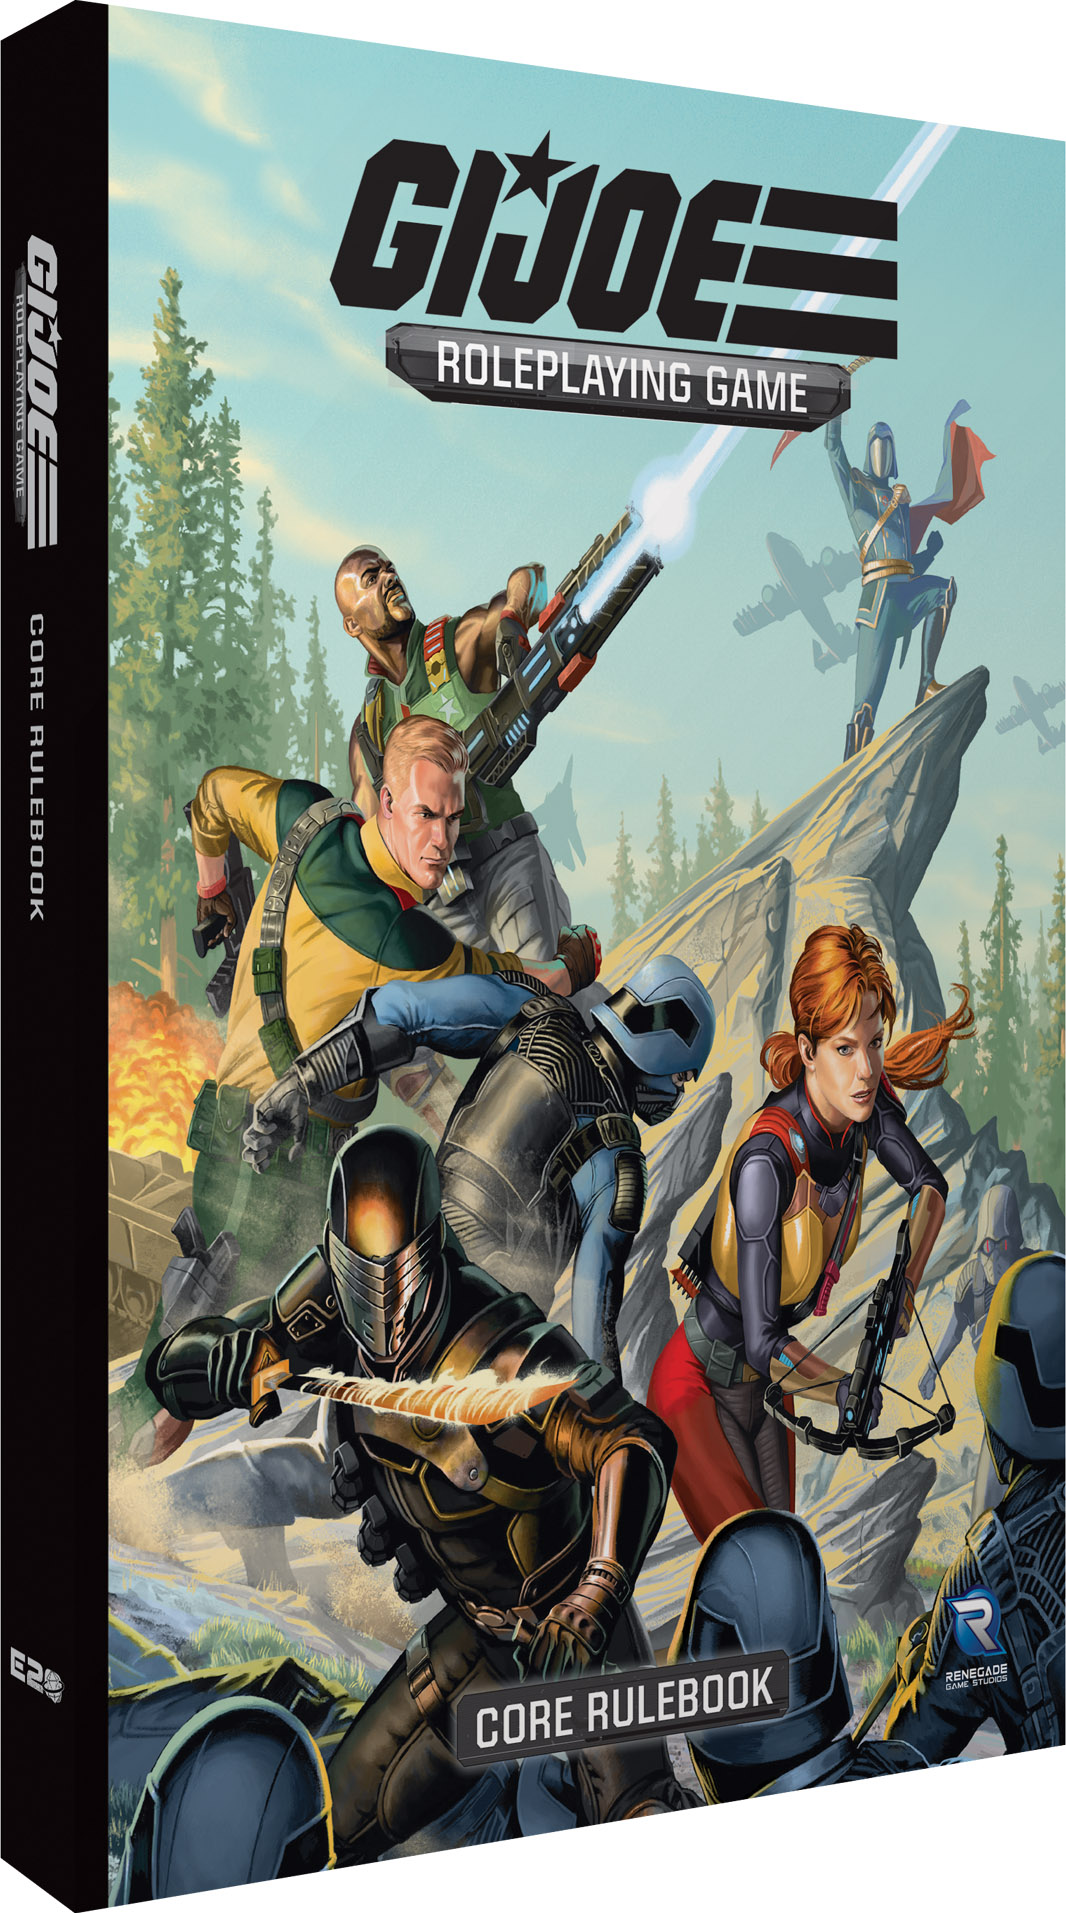 GTM #263 - G.I. Joe The Roleplaying Game